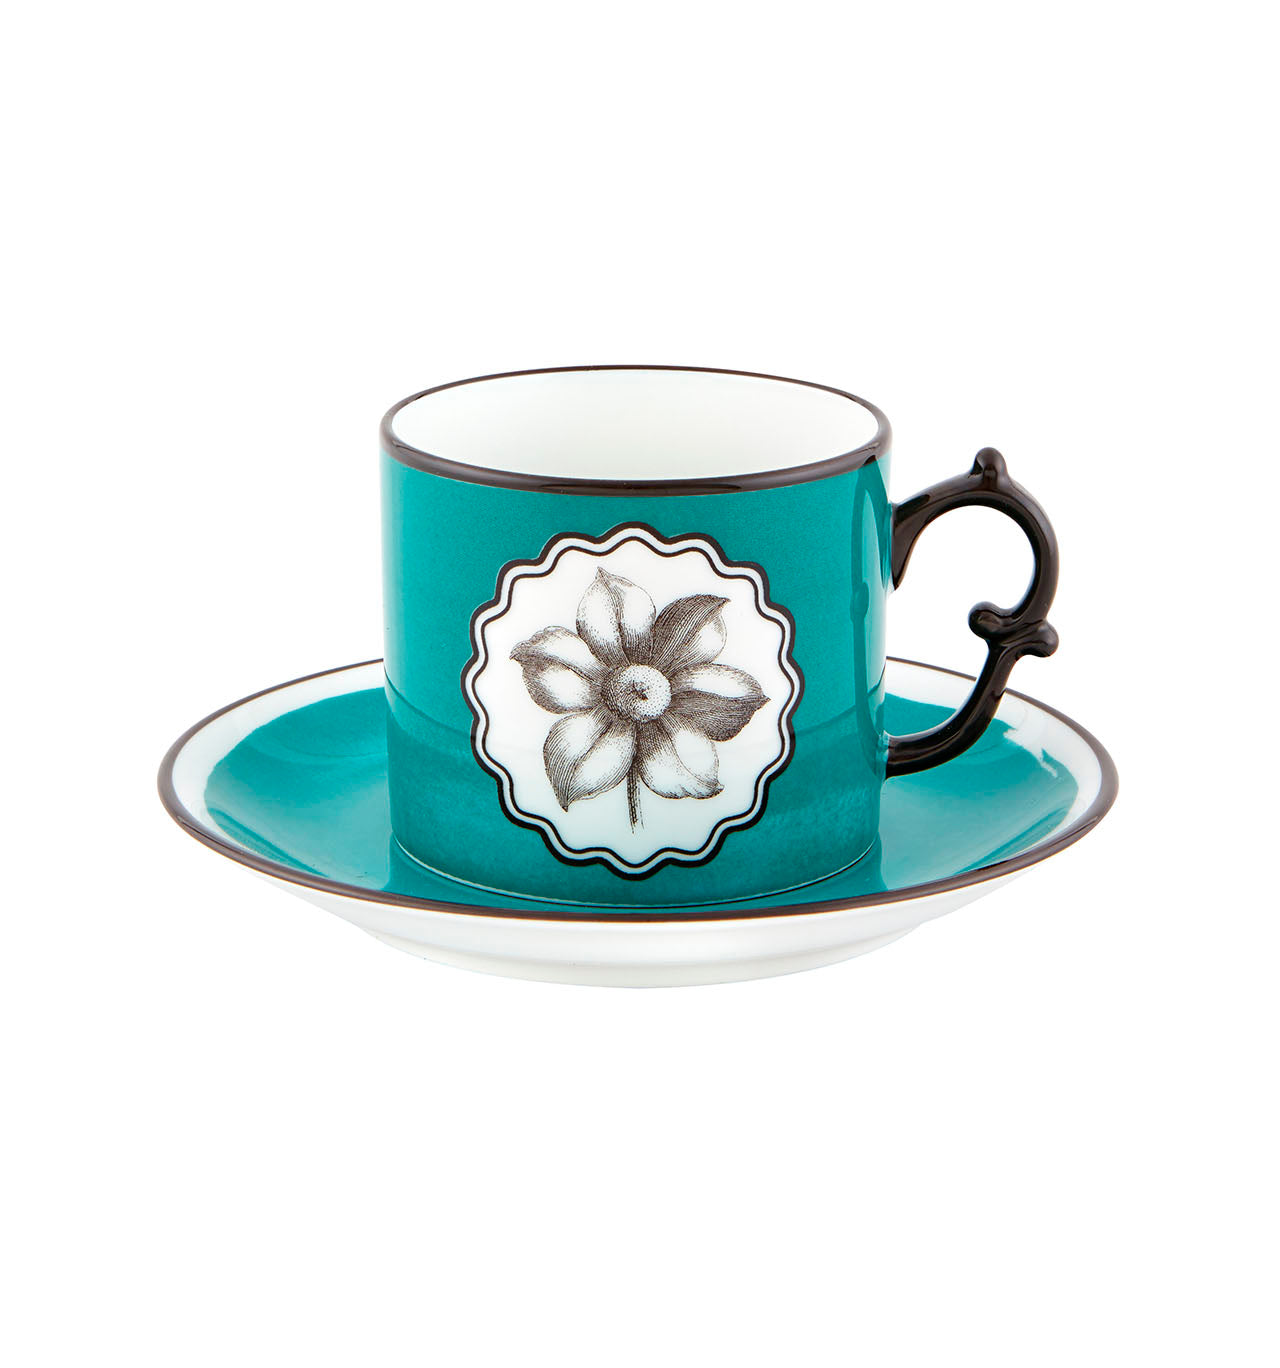 HERBARIAE TEA CUP AND SAUCER PEACOCK